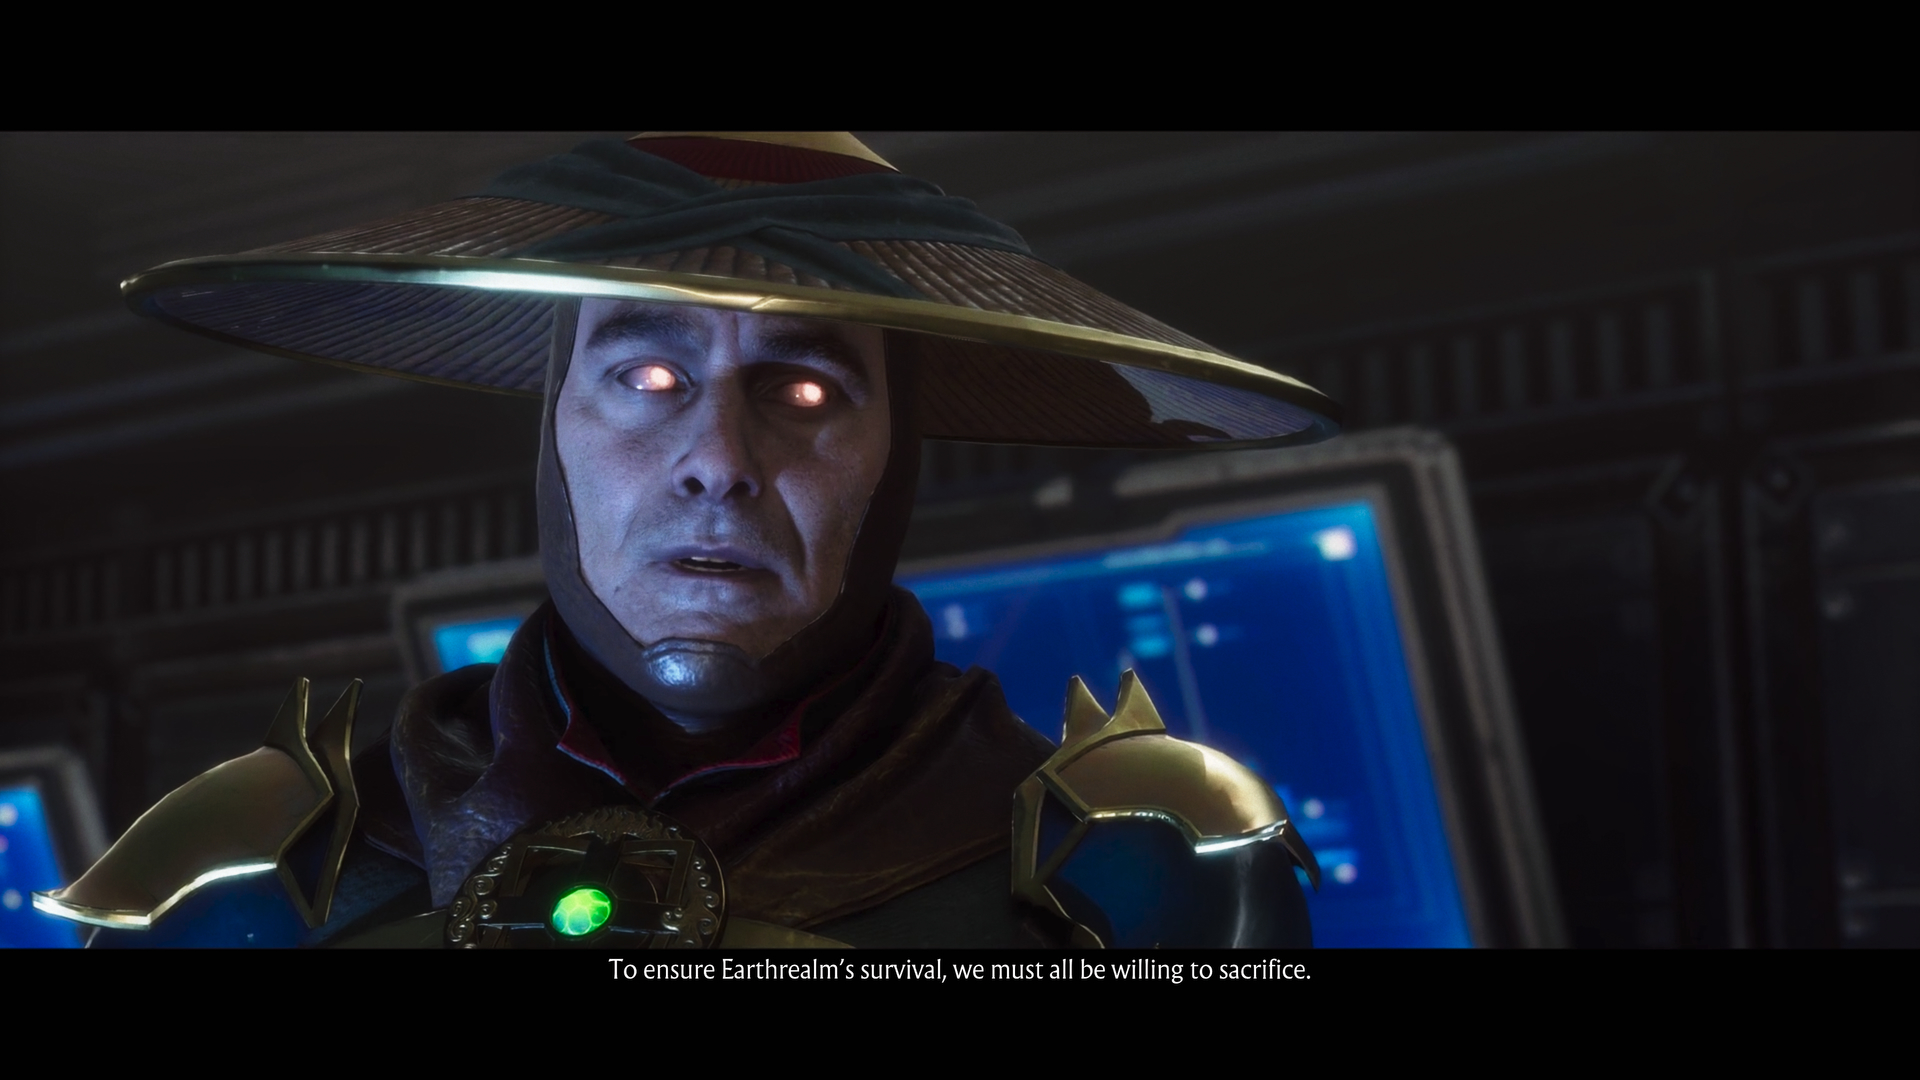 Mortal Kombat 11 Review: A gory, hilarious, and over-the-top fighting  showcase